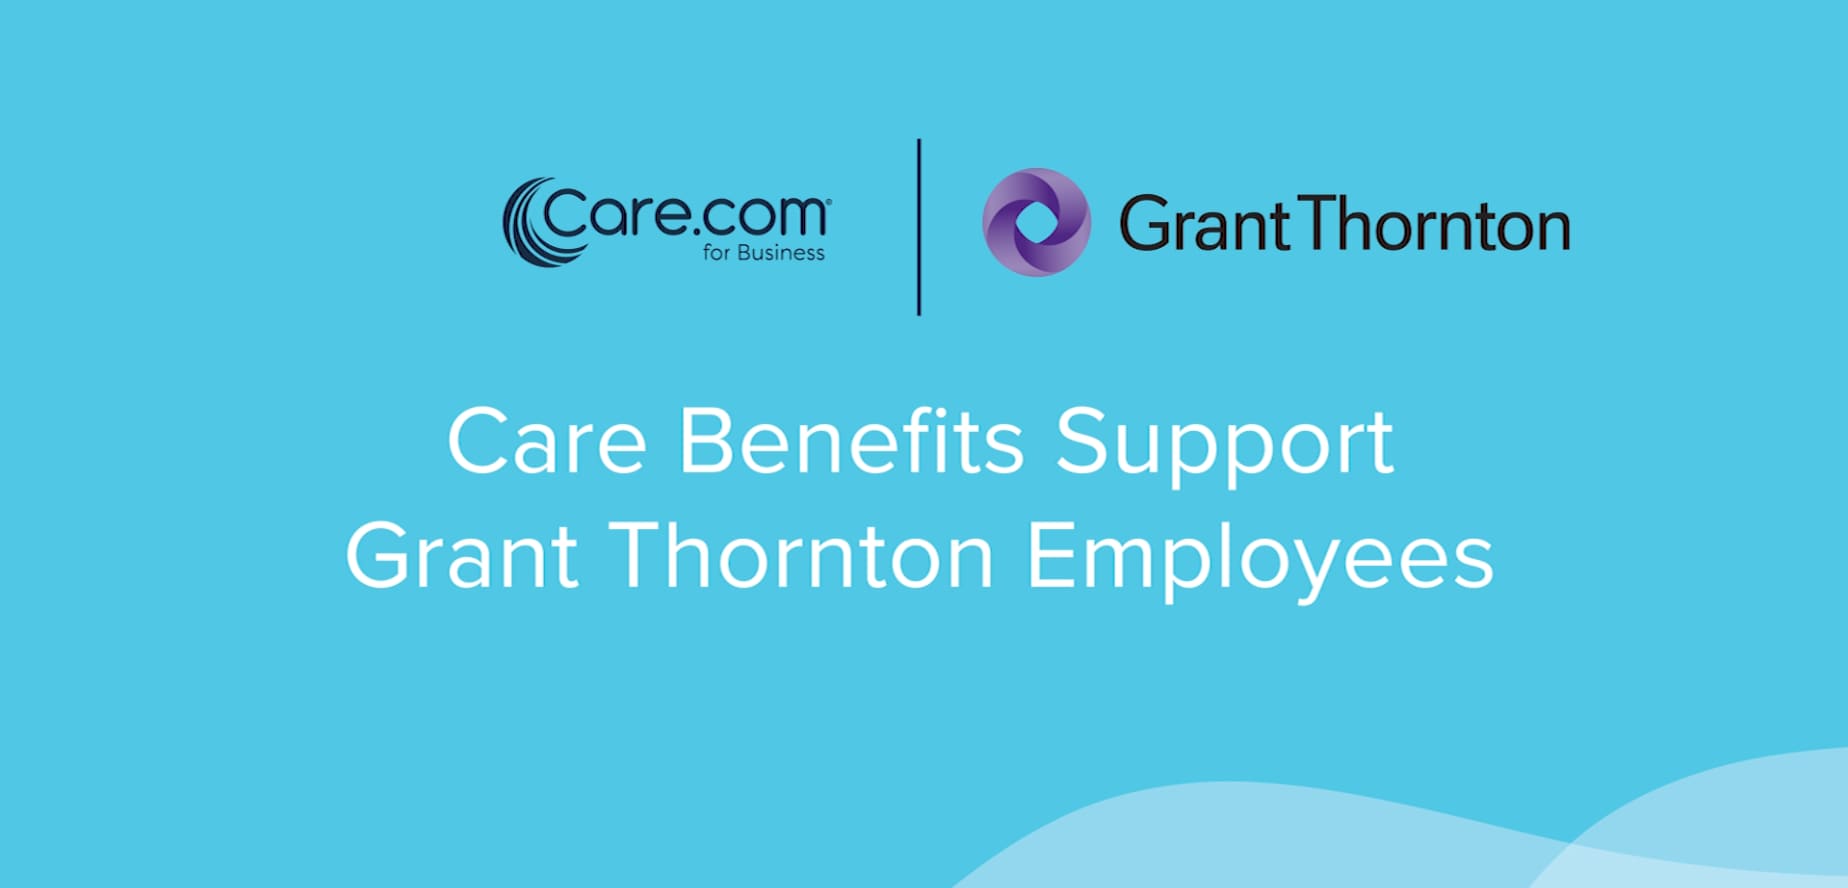 Grant Thornton Meeting the Needs of a Diverse Workforce Care for